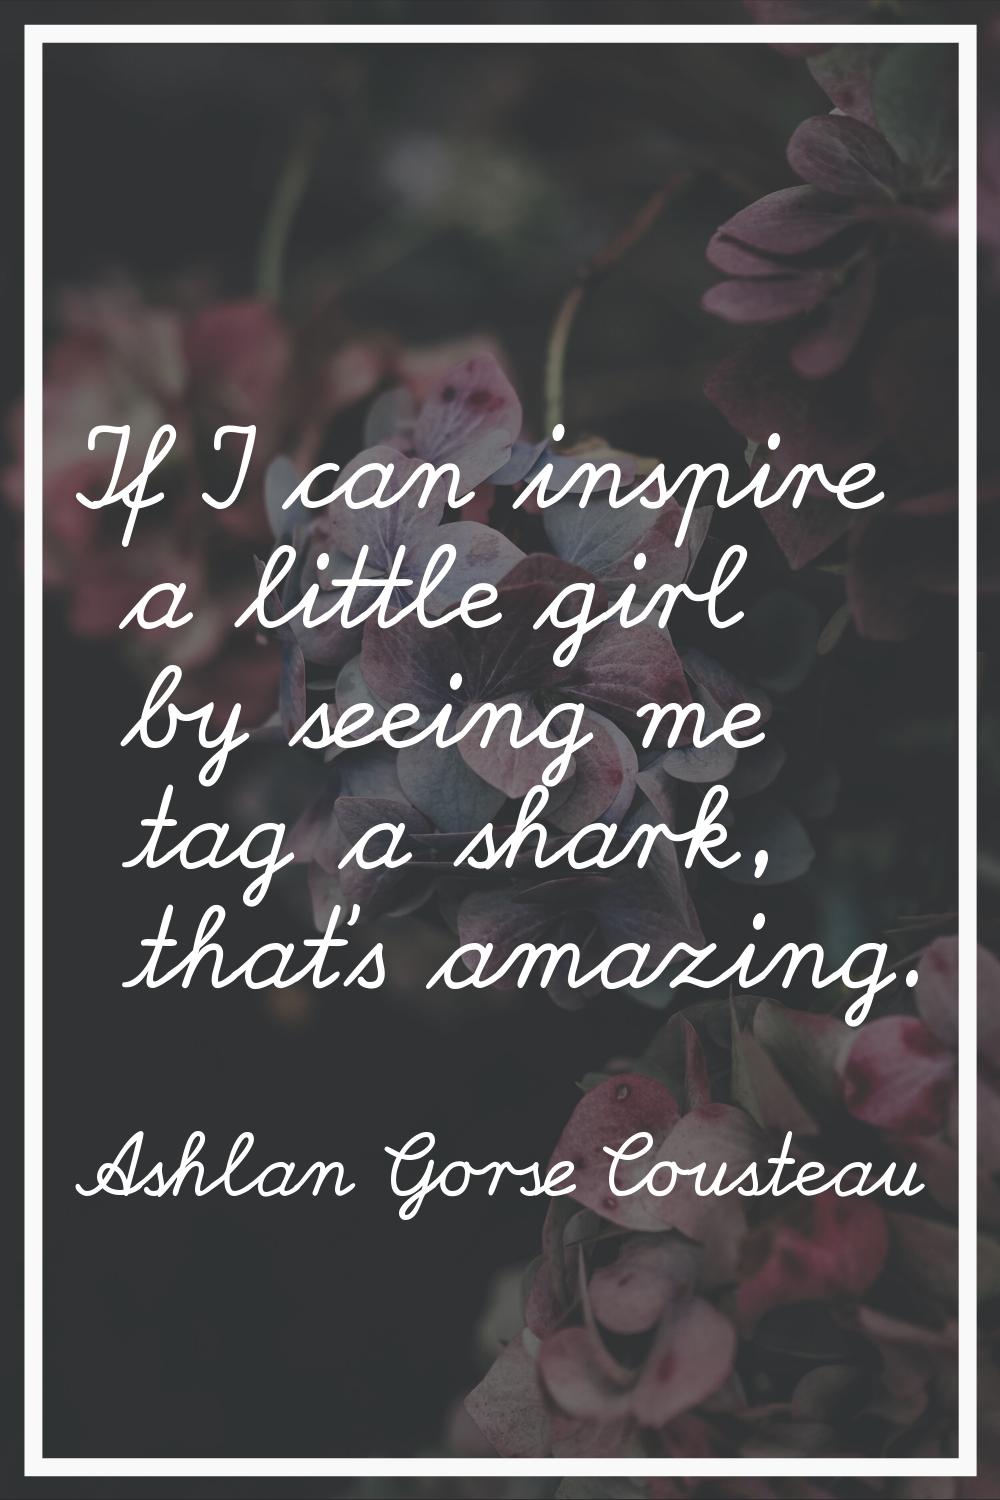 If I can inspire a little girl by seeing me tag a shark, that's amazing.